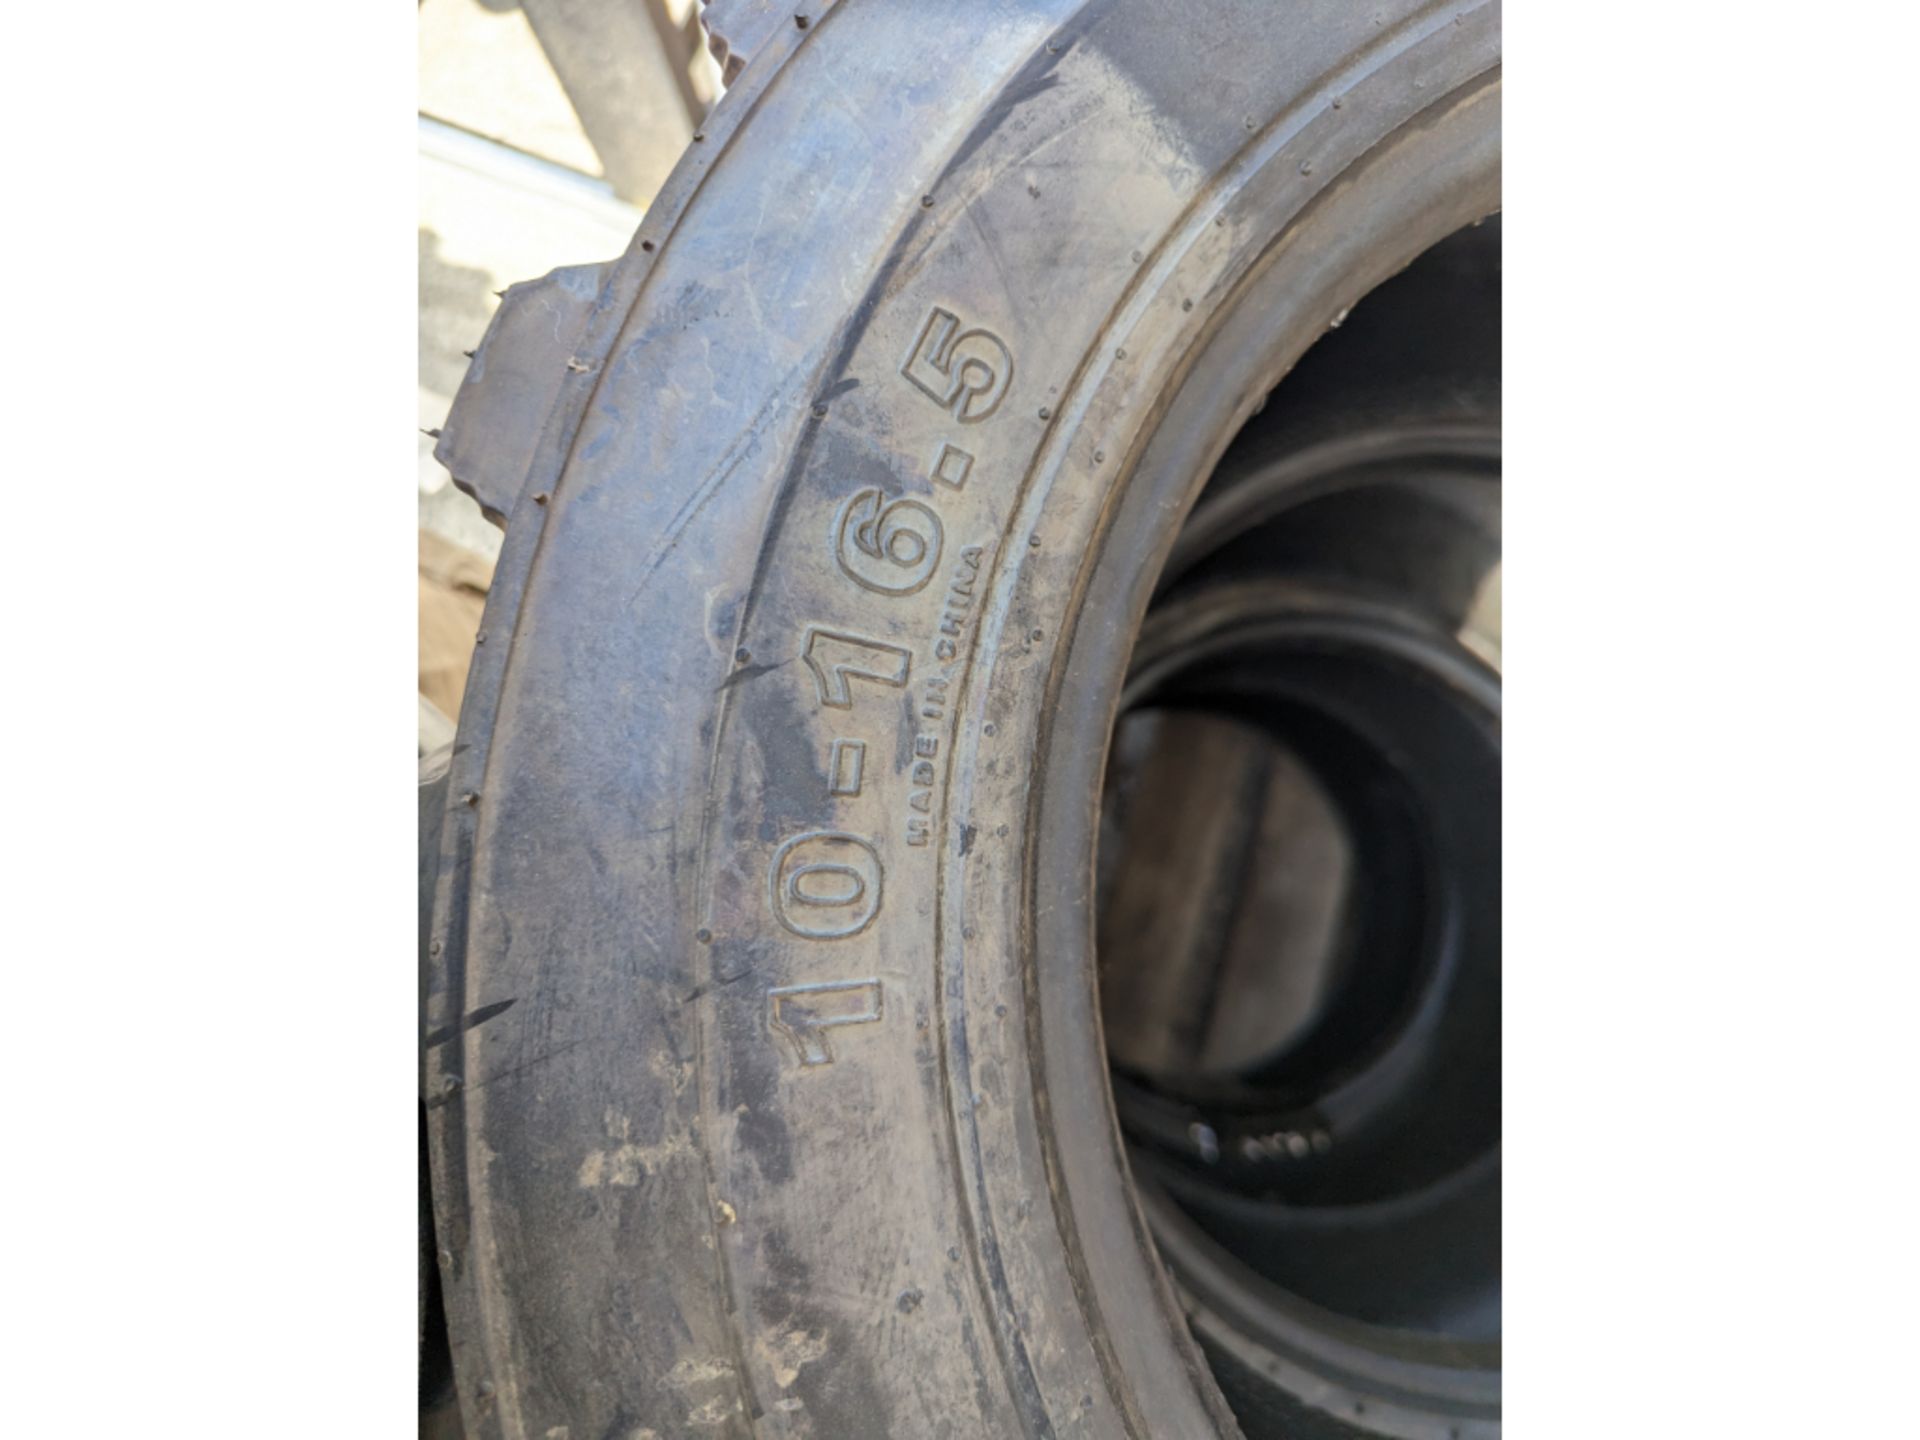 4 NEW Road Crew SKS-1 Skid Steer Tires, 1 Used Tire, 10-16.5 - Image 6 of 10